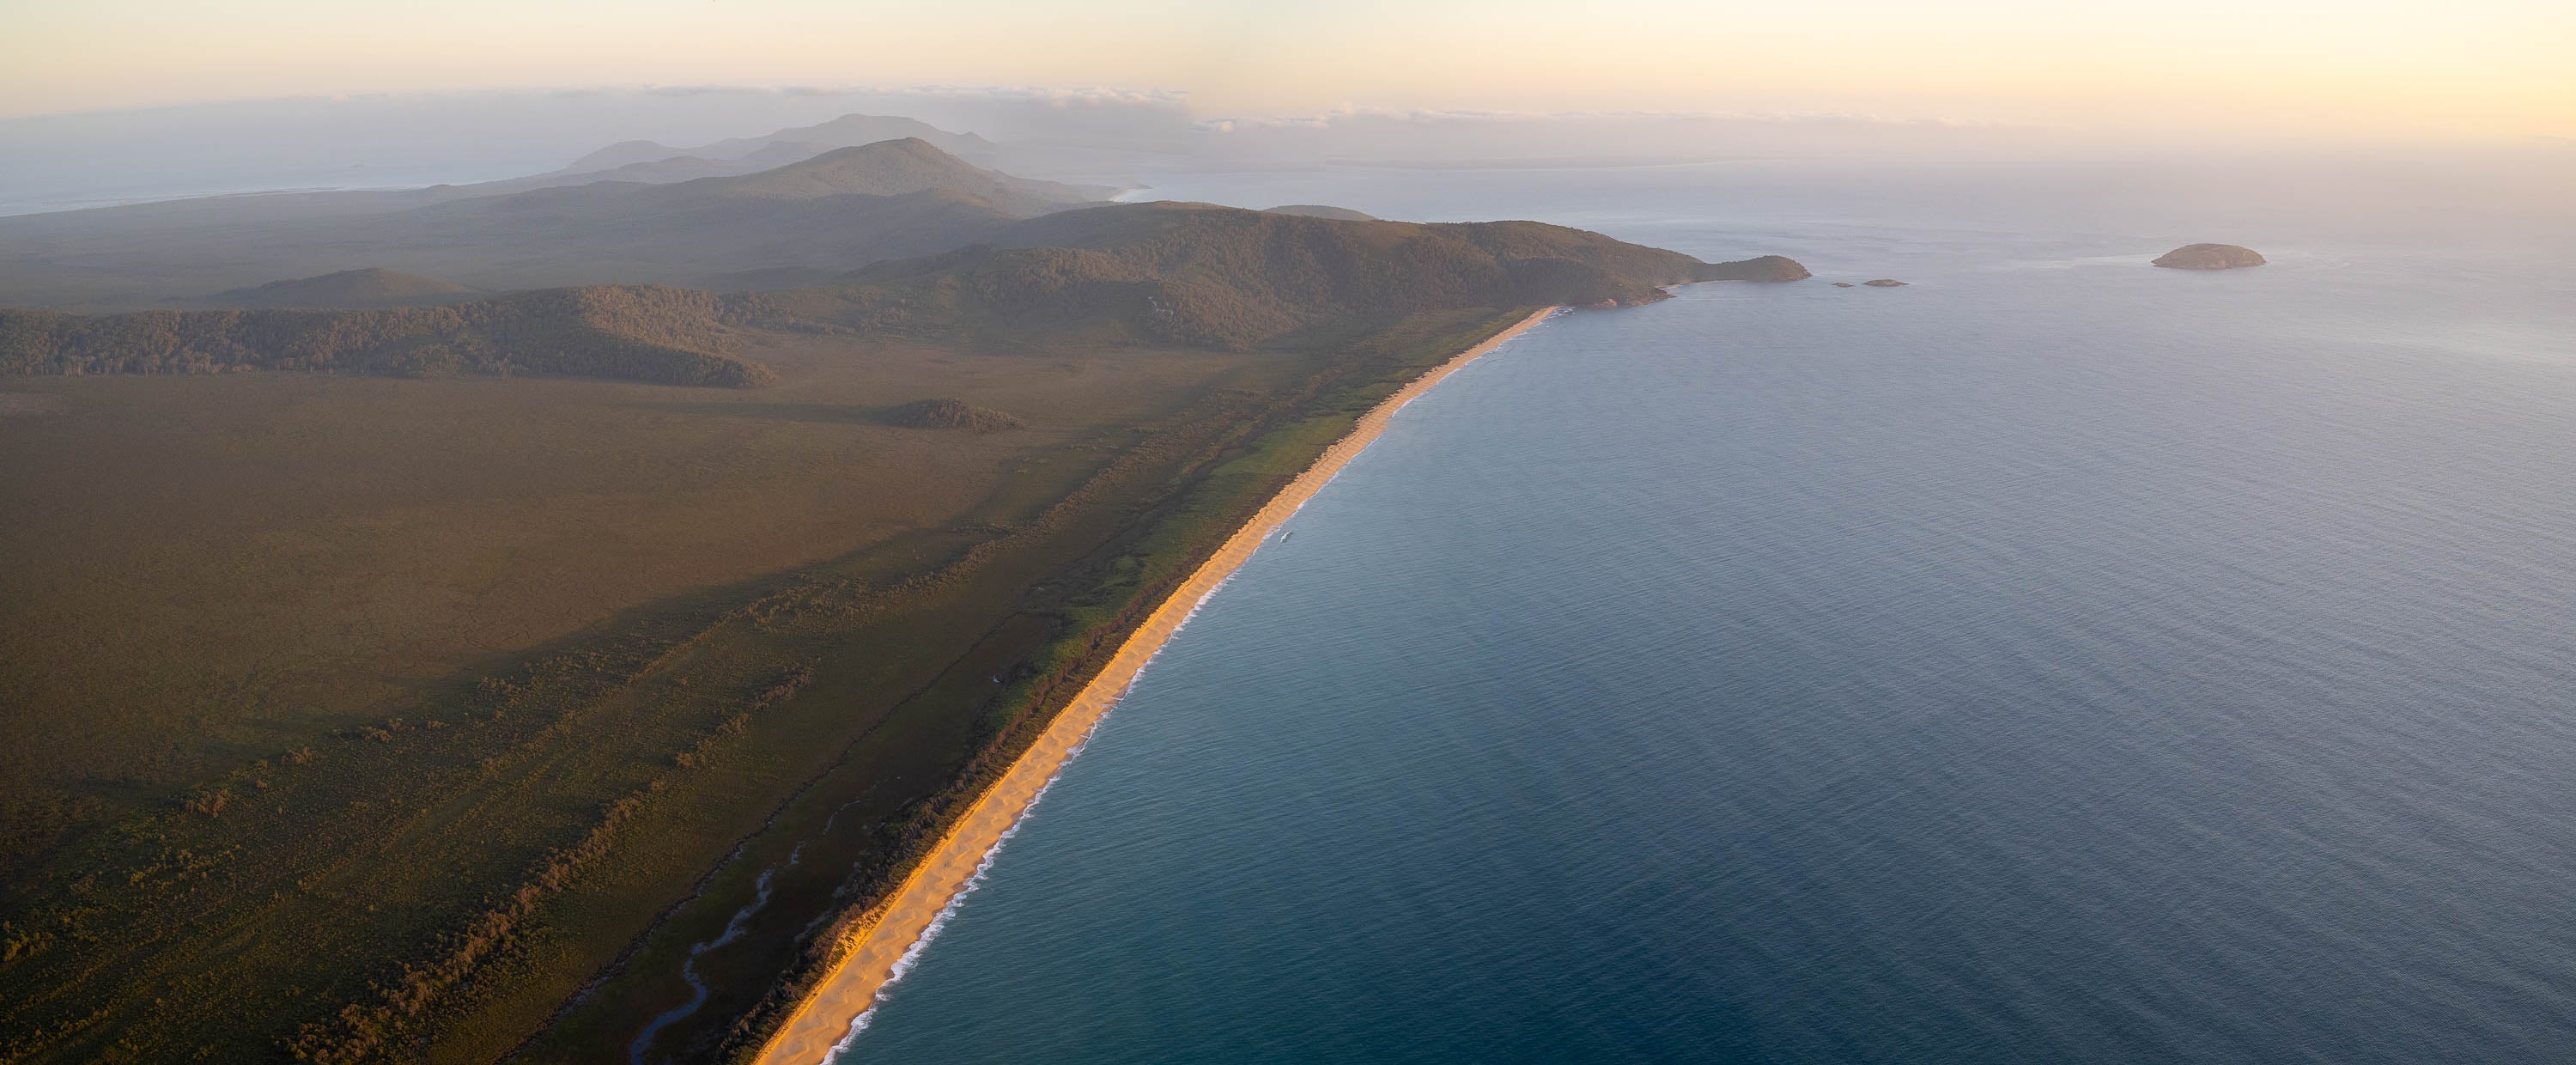 Five Mile Beach from above, Wilson's Promontory